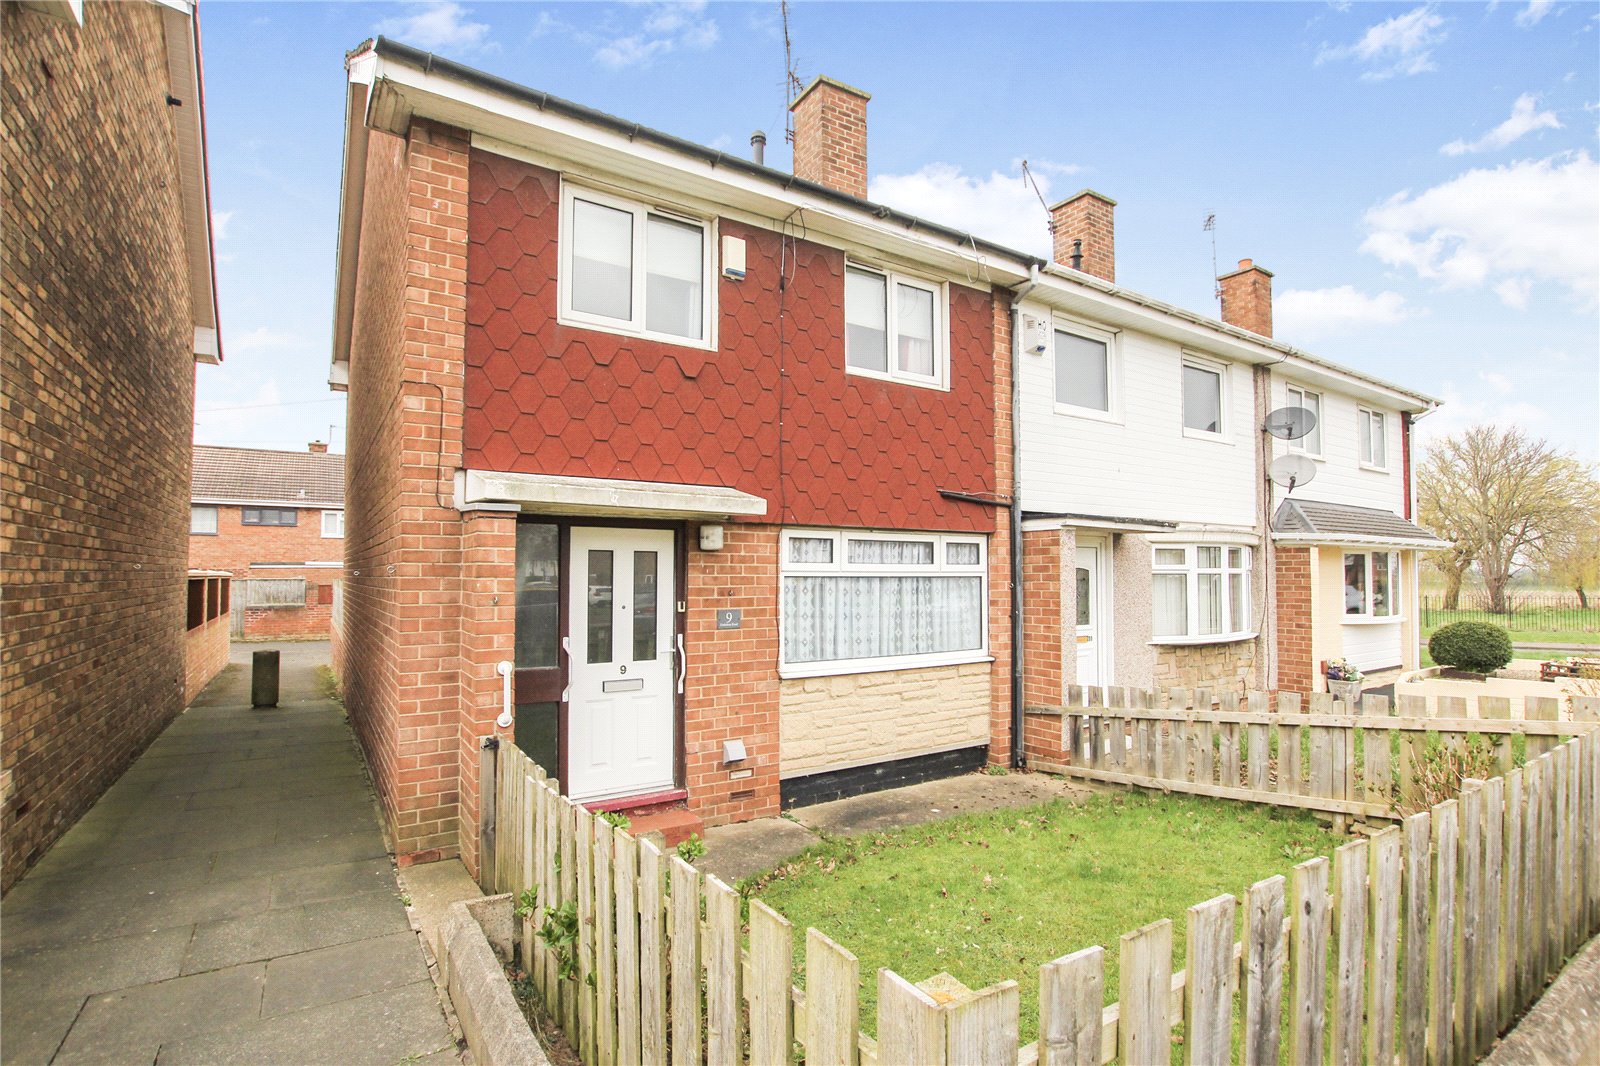 3 bed house for sale in Endeston Road, Priestfields - Property Image 1